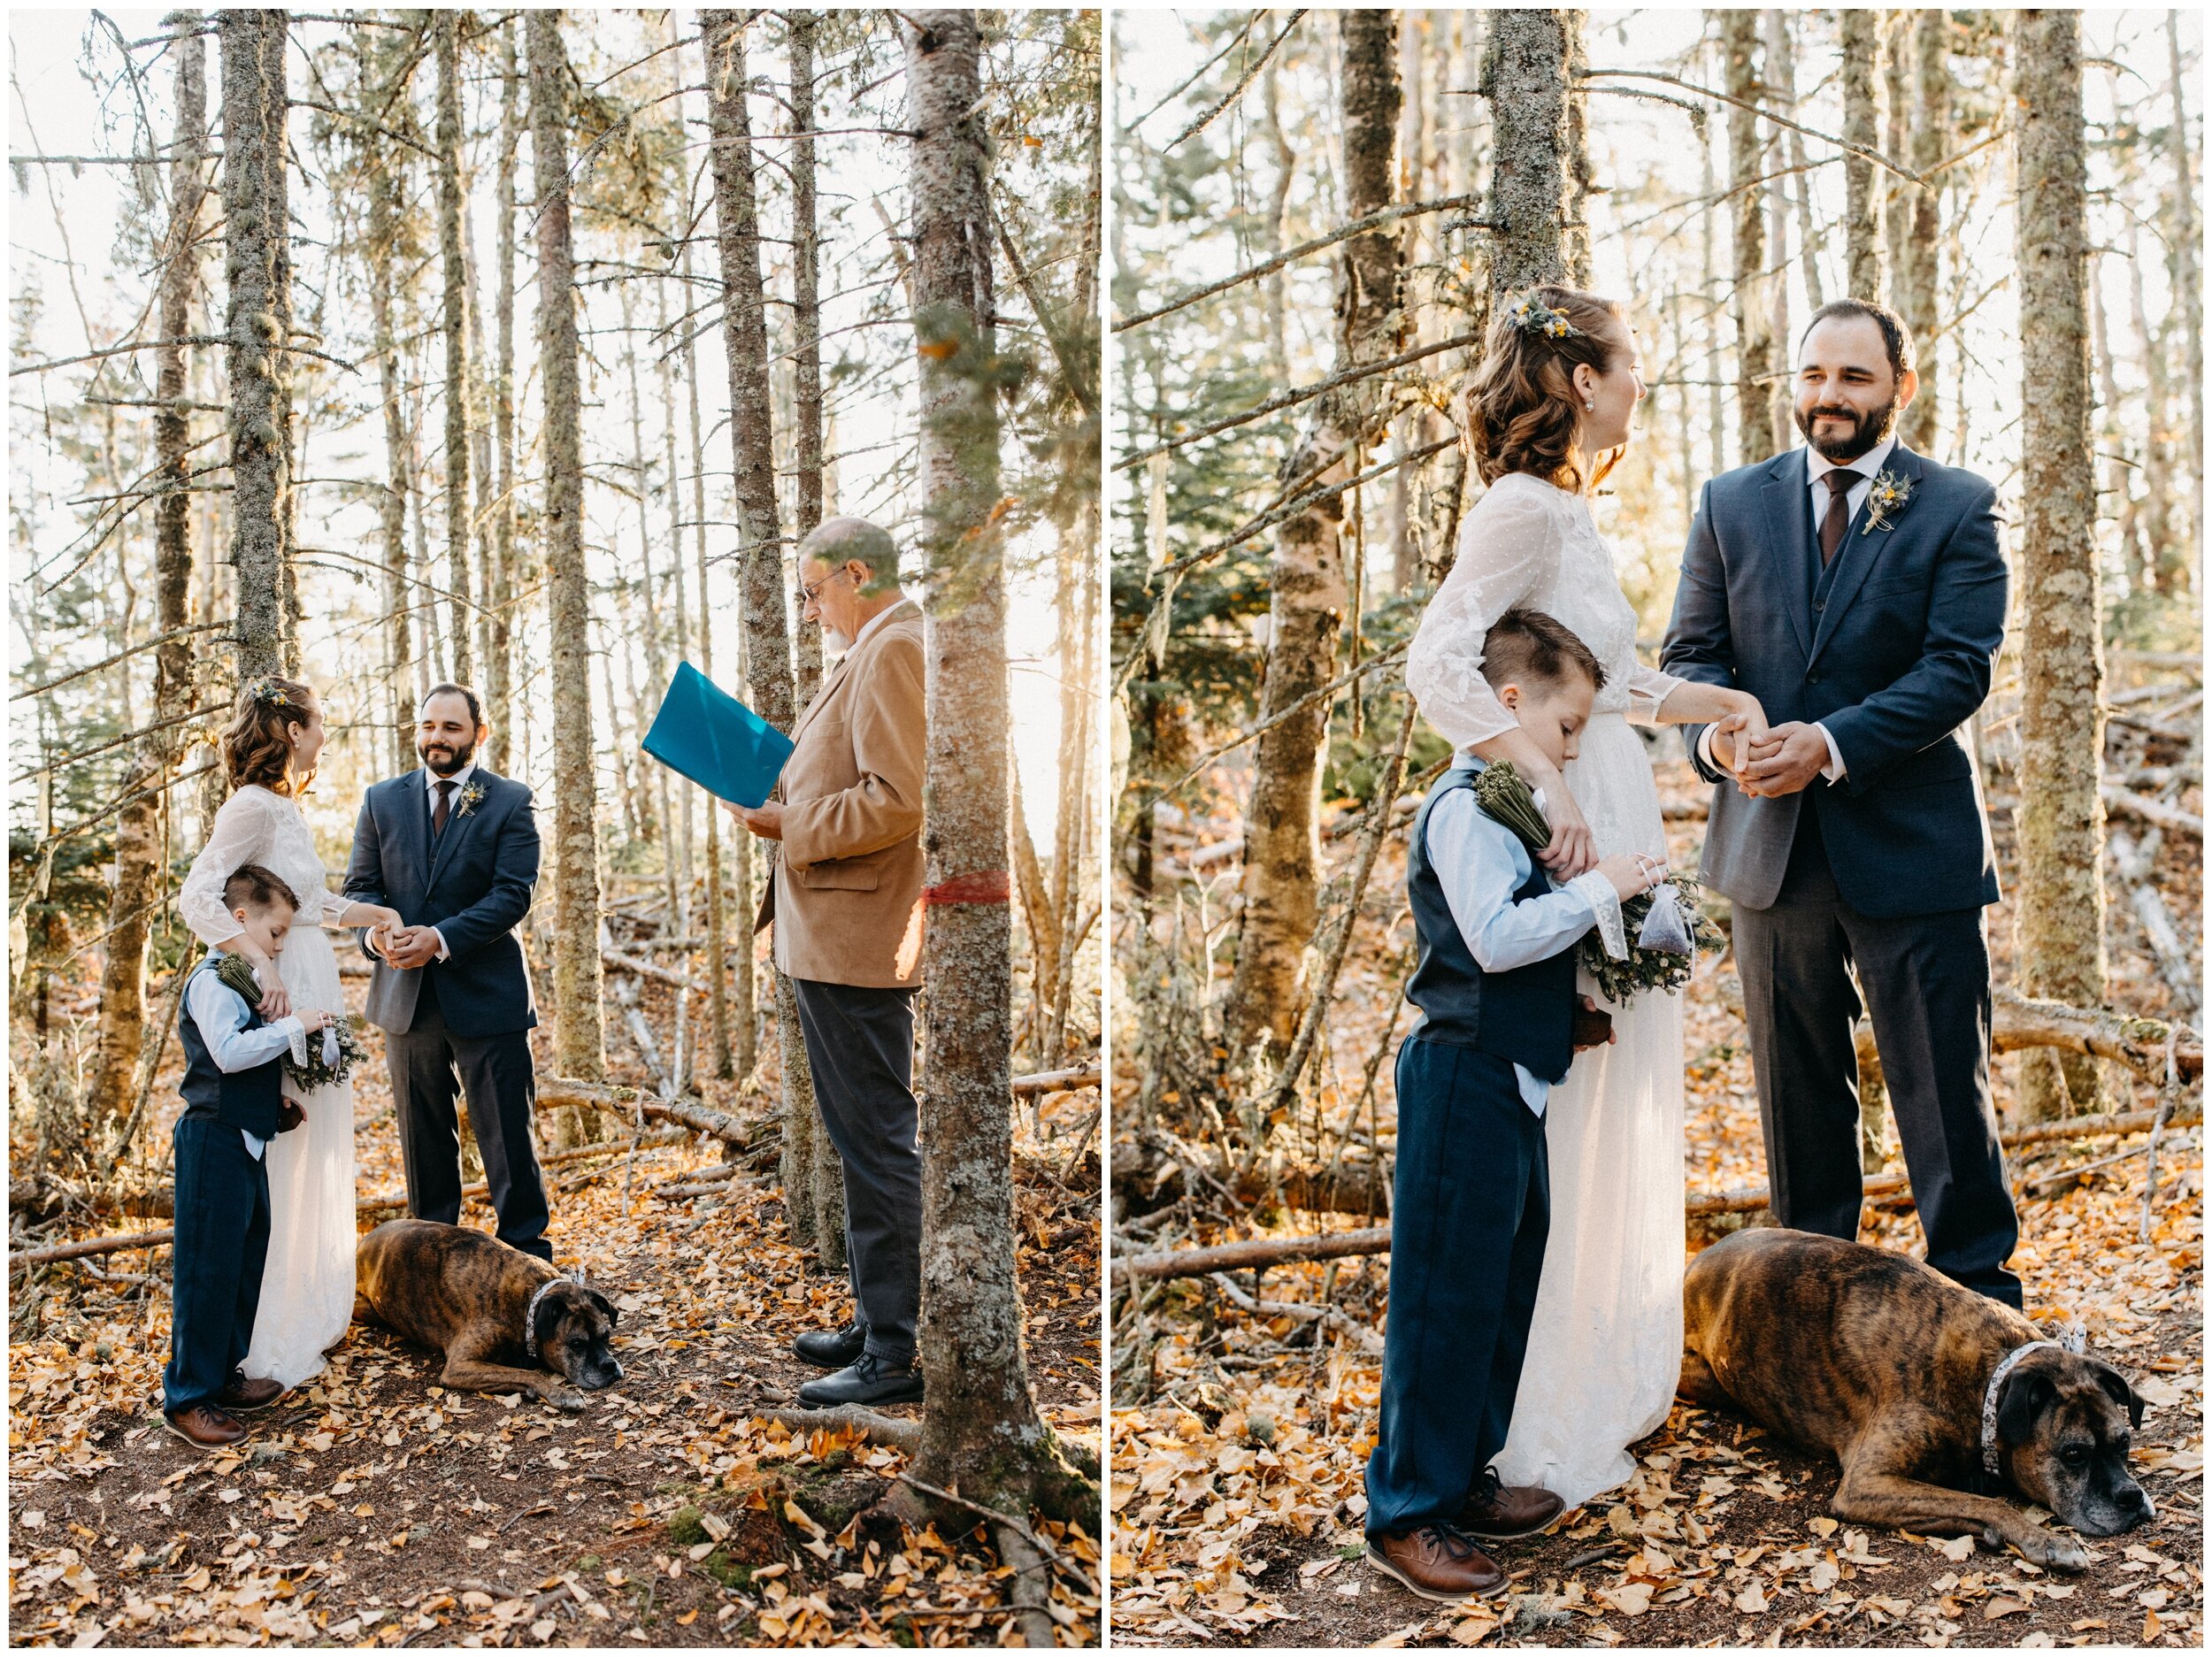 Intimate Artists' Point wedding ceremony in the woods